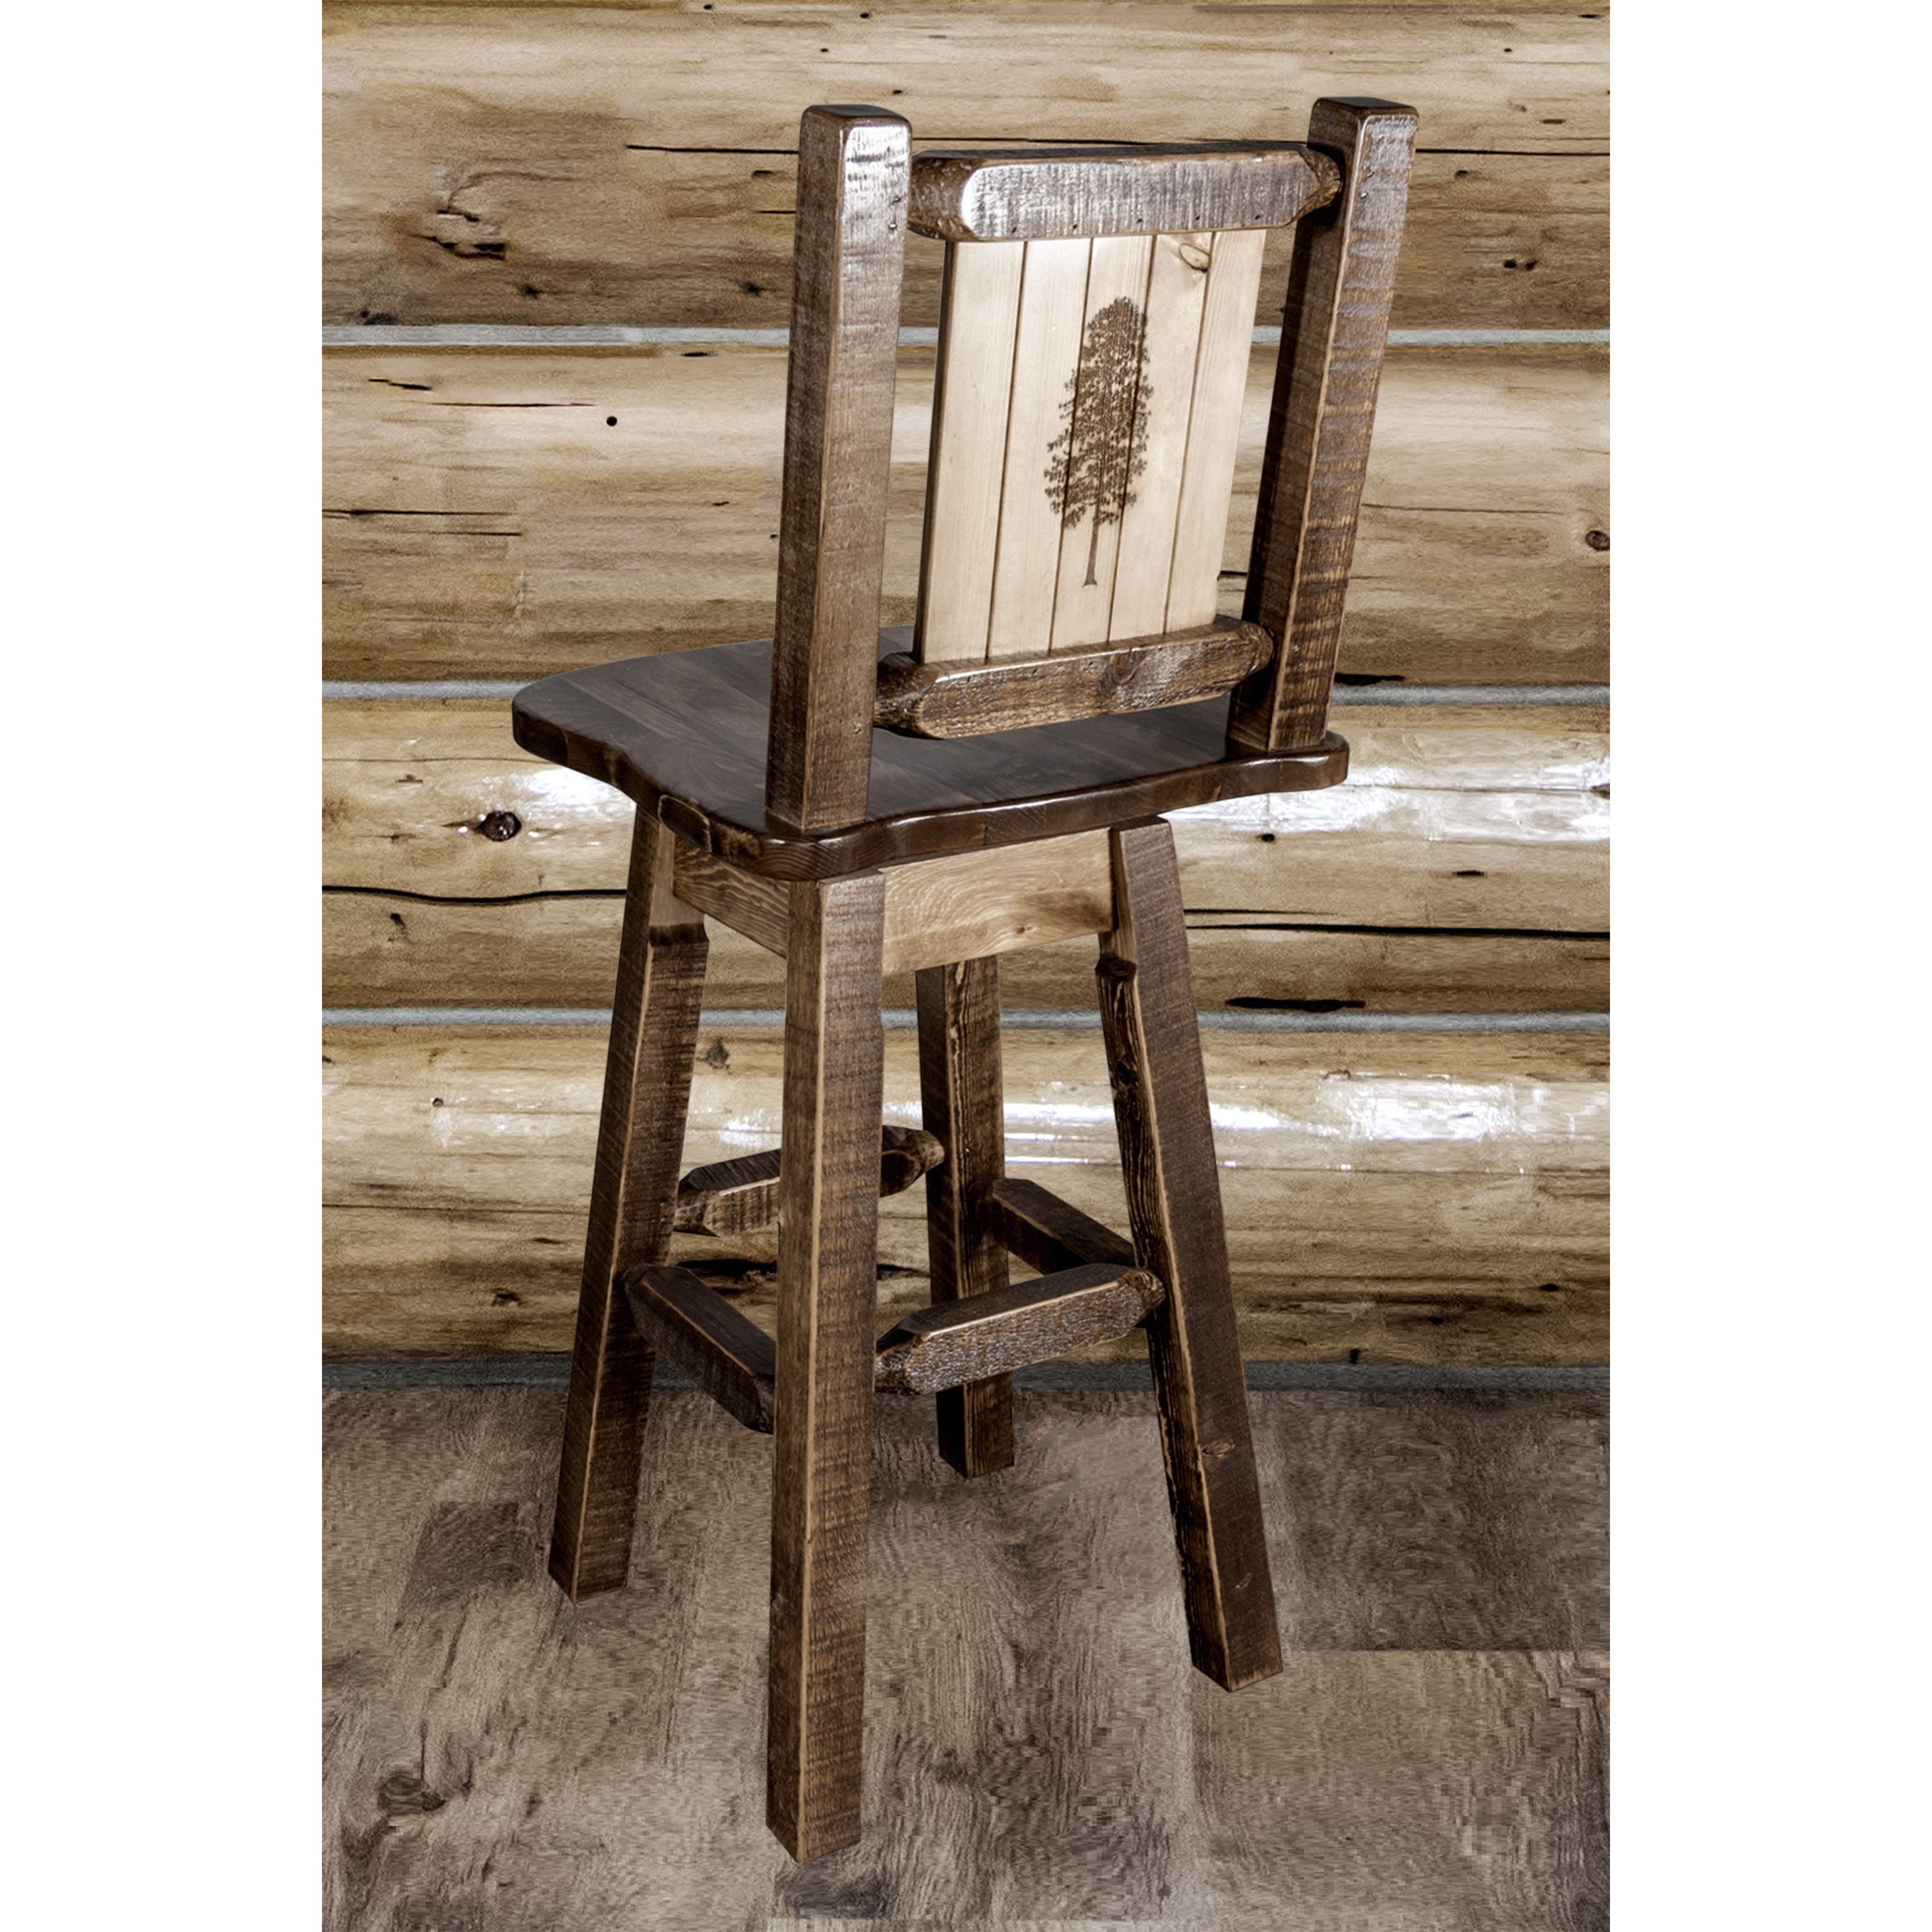 montana woodworks homestead collection barstool with back swivel and laser engraved pine design stain lacquer finish mwhcbswsnrsllzpine indoor